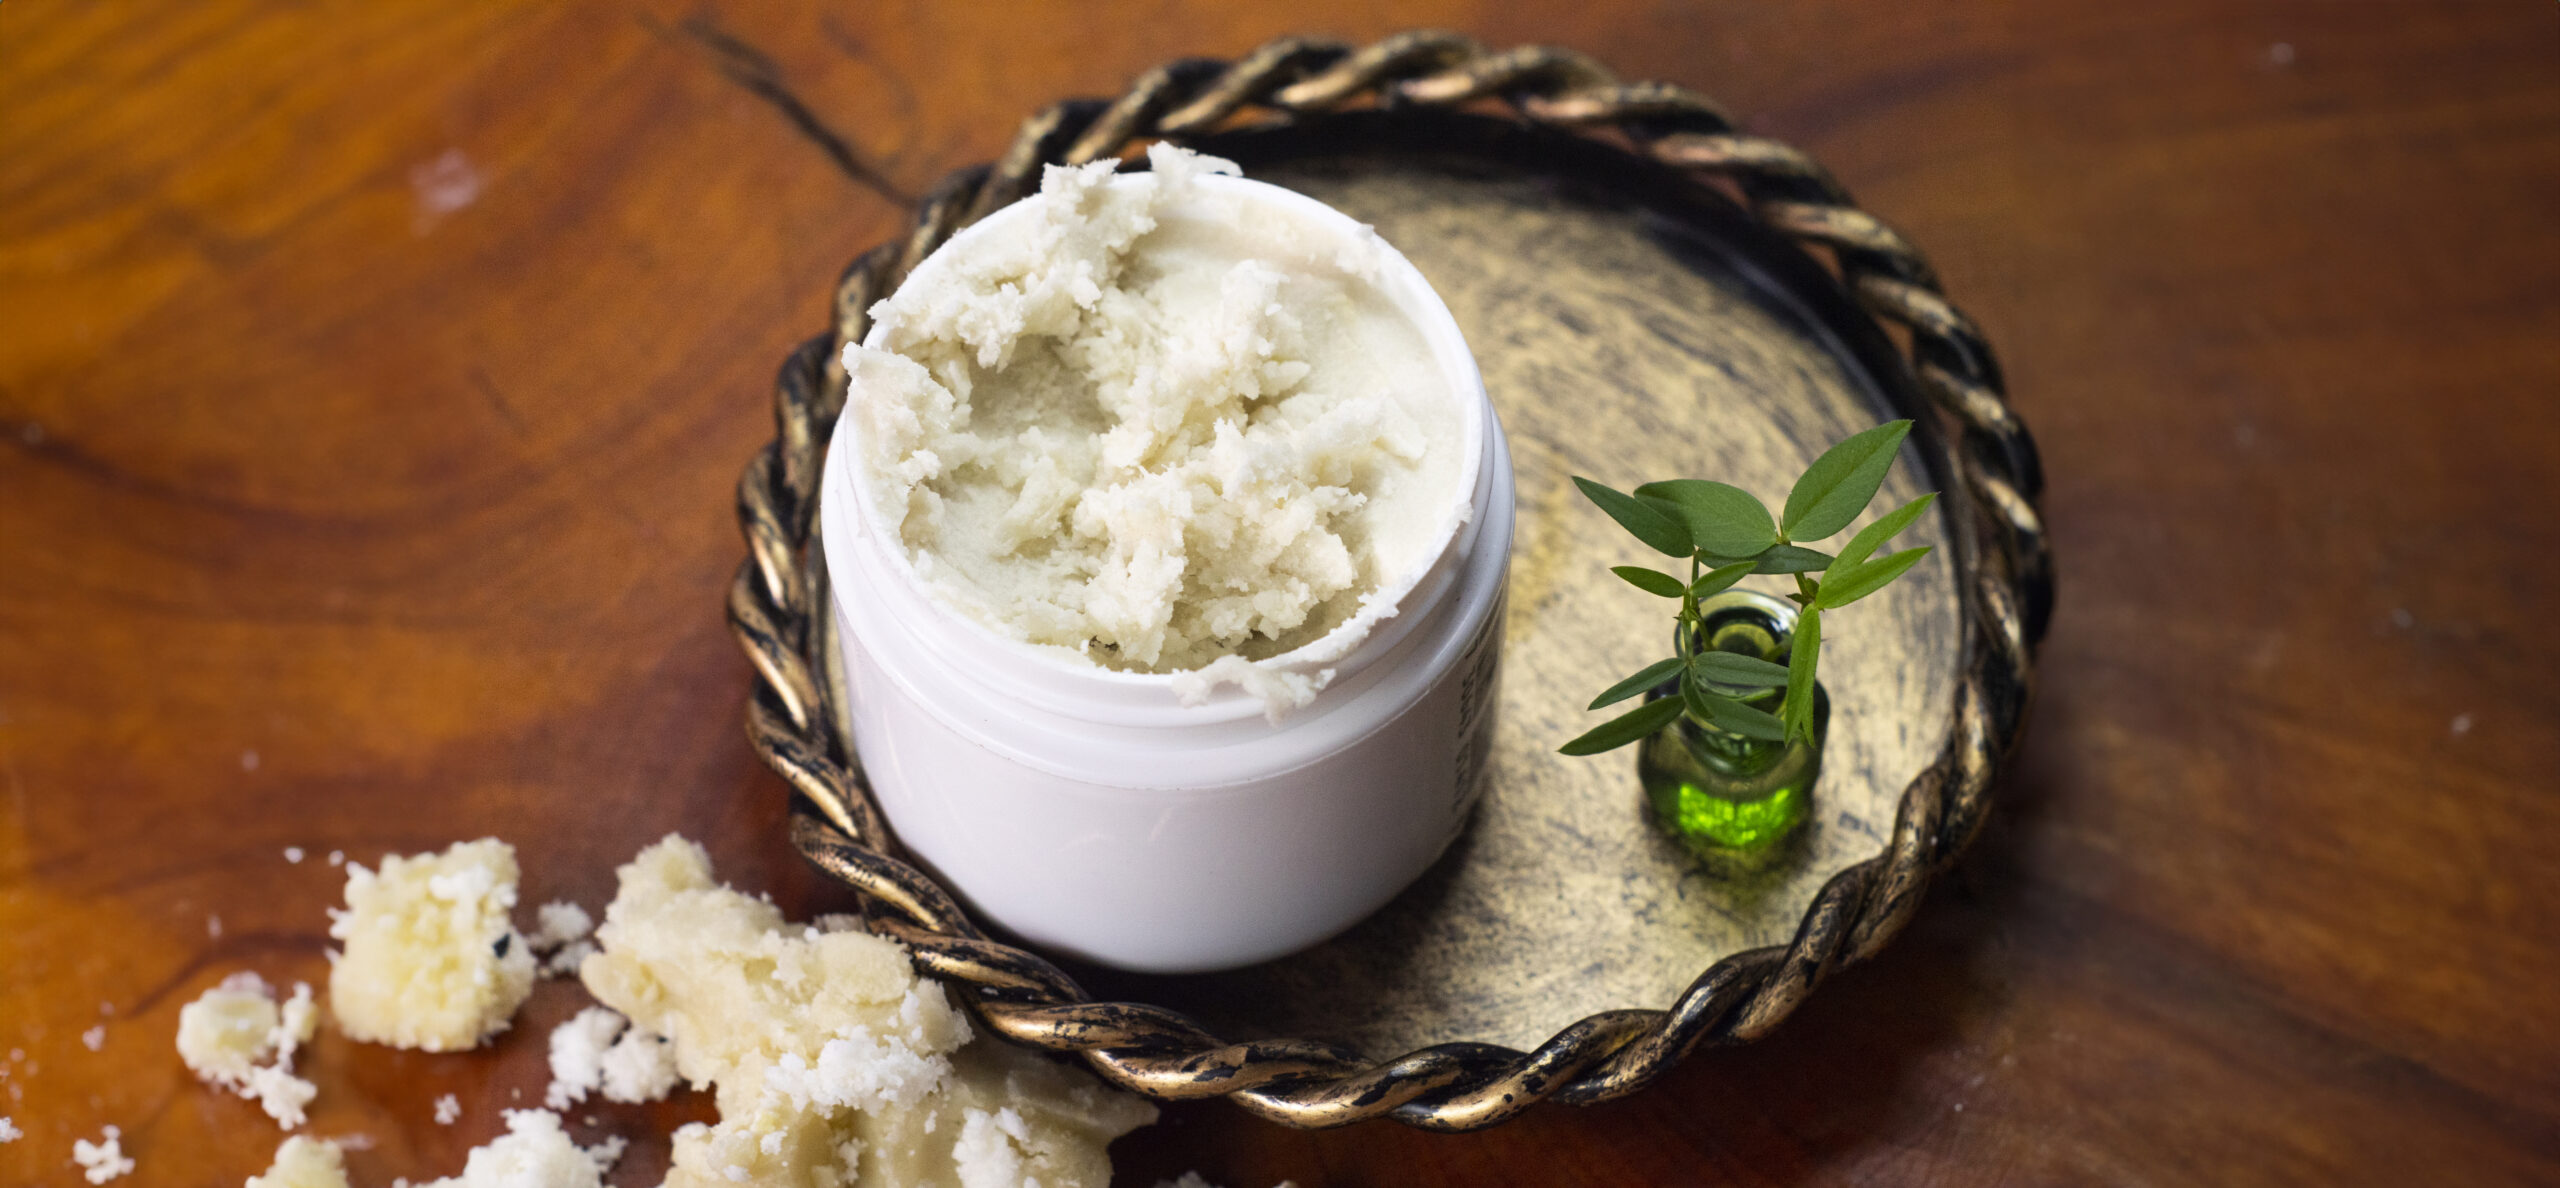 healing butter, health and wellness, all things butter, body care, skin care, lotion